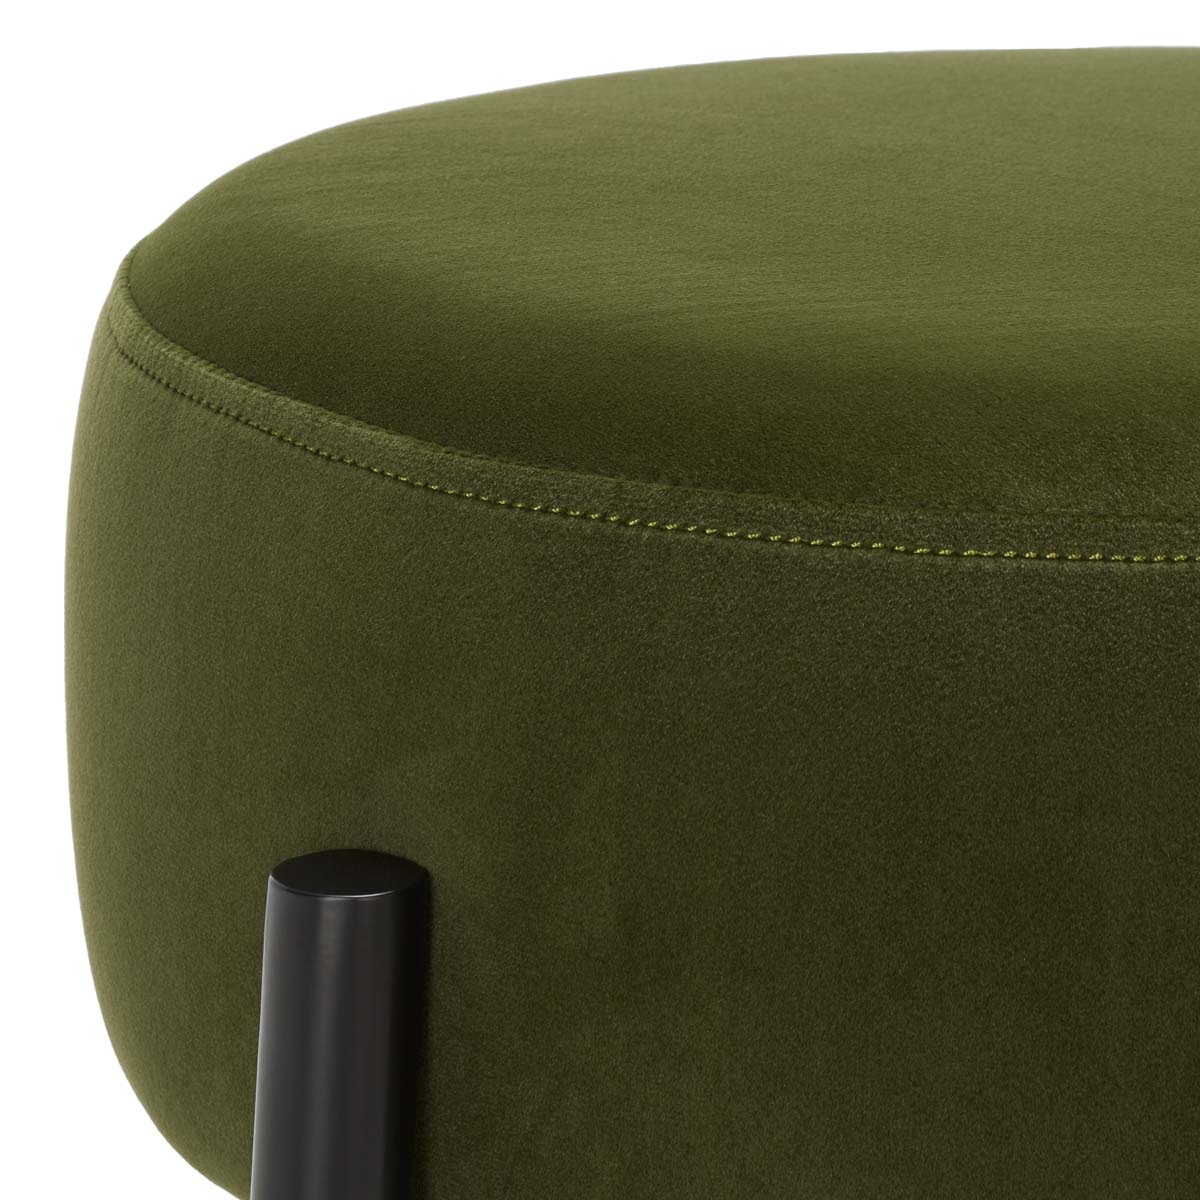 Safavieh Couture Paisleigh Boucle Metal Leg Counter Stool - Forest Green / Black